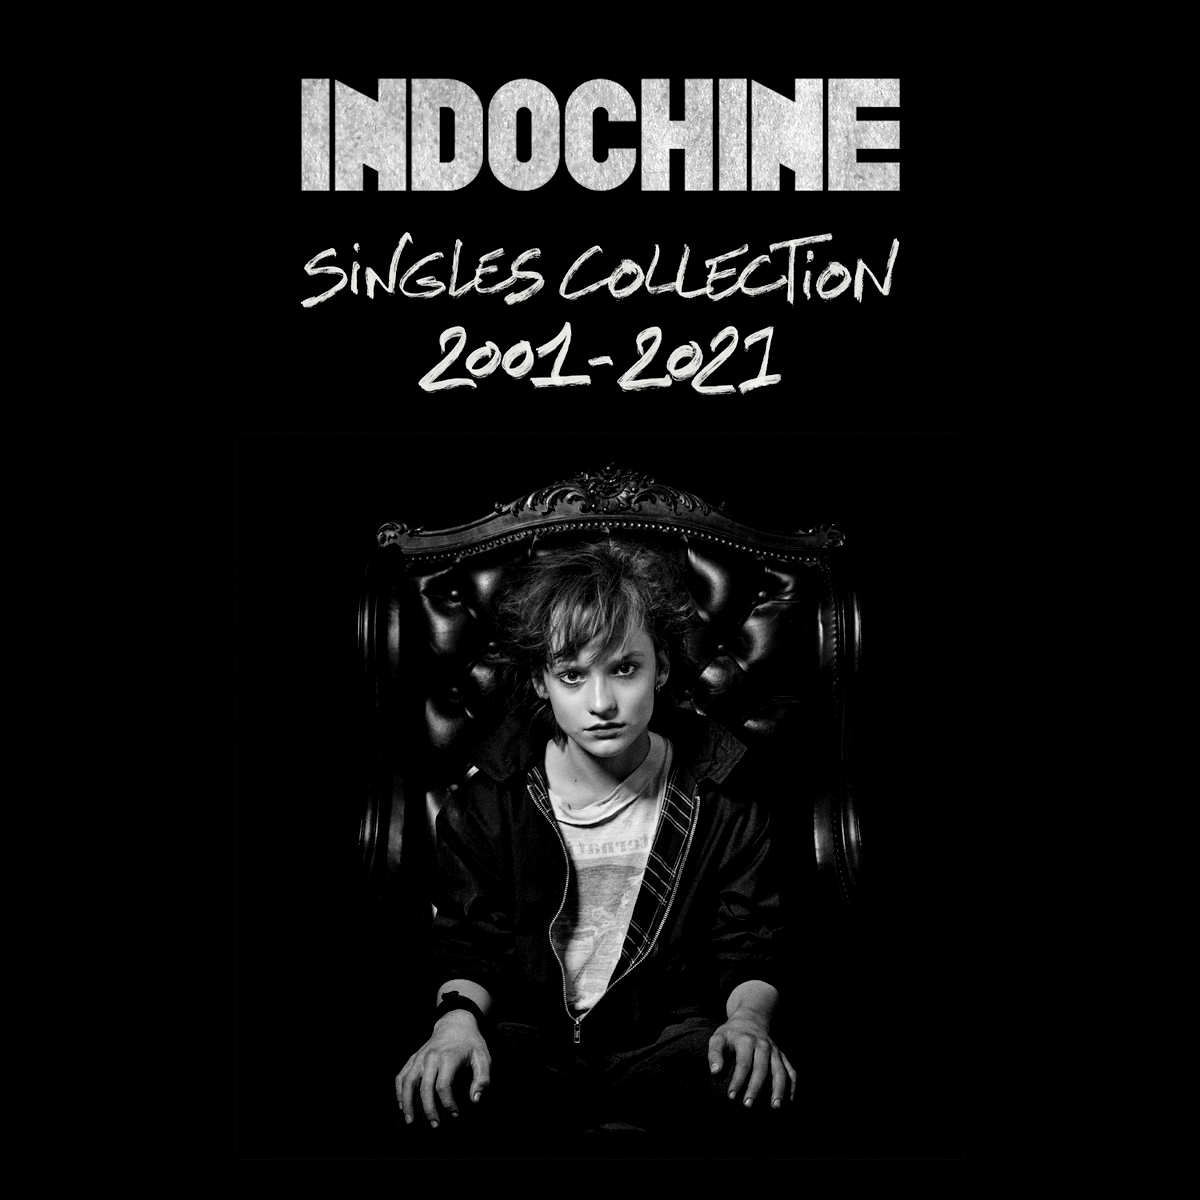 Indochine – Singles Collection (2001-2021) (2020) [FLAC 24bit/44,1kHz]